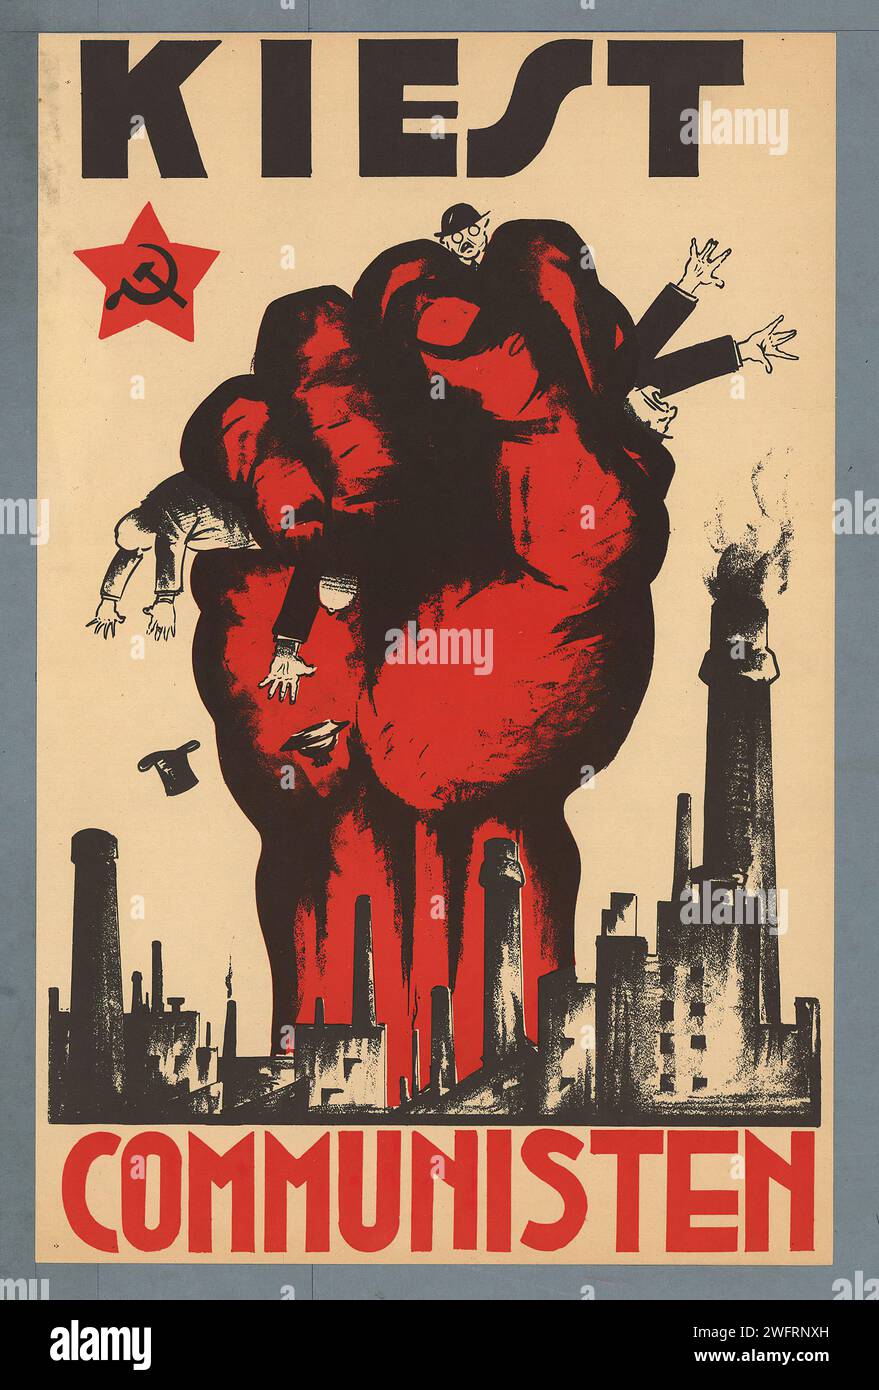 'KIEST COMMUNISTEN' which translates to 'CHOOSE COMMUNISTS.' Vintage Dutch Advertising poster depicting a powerful red fist and workers against an industrial backdrop, in a stark red and black color scheme. The style is bold and propagandistic, typical of communist posters of the period. Stock Photo